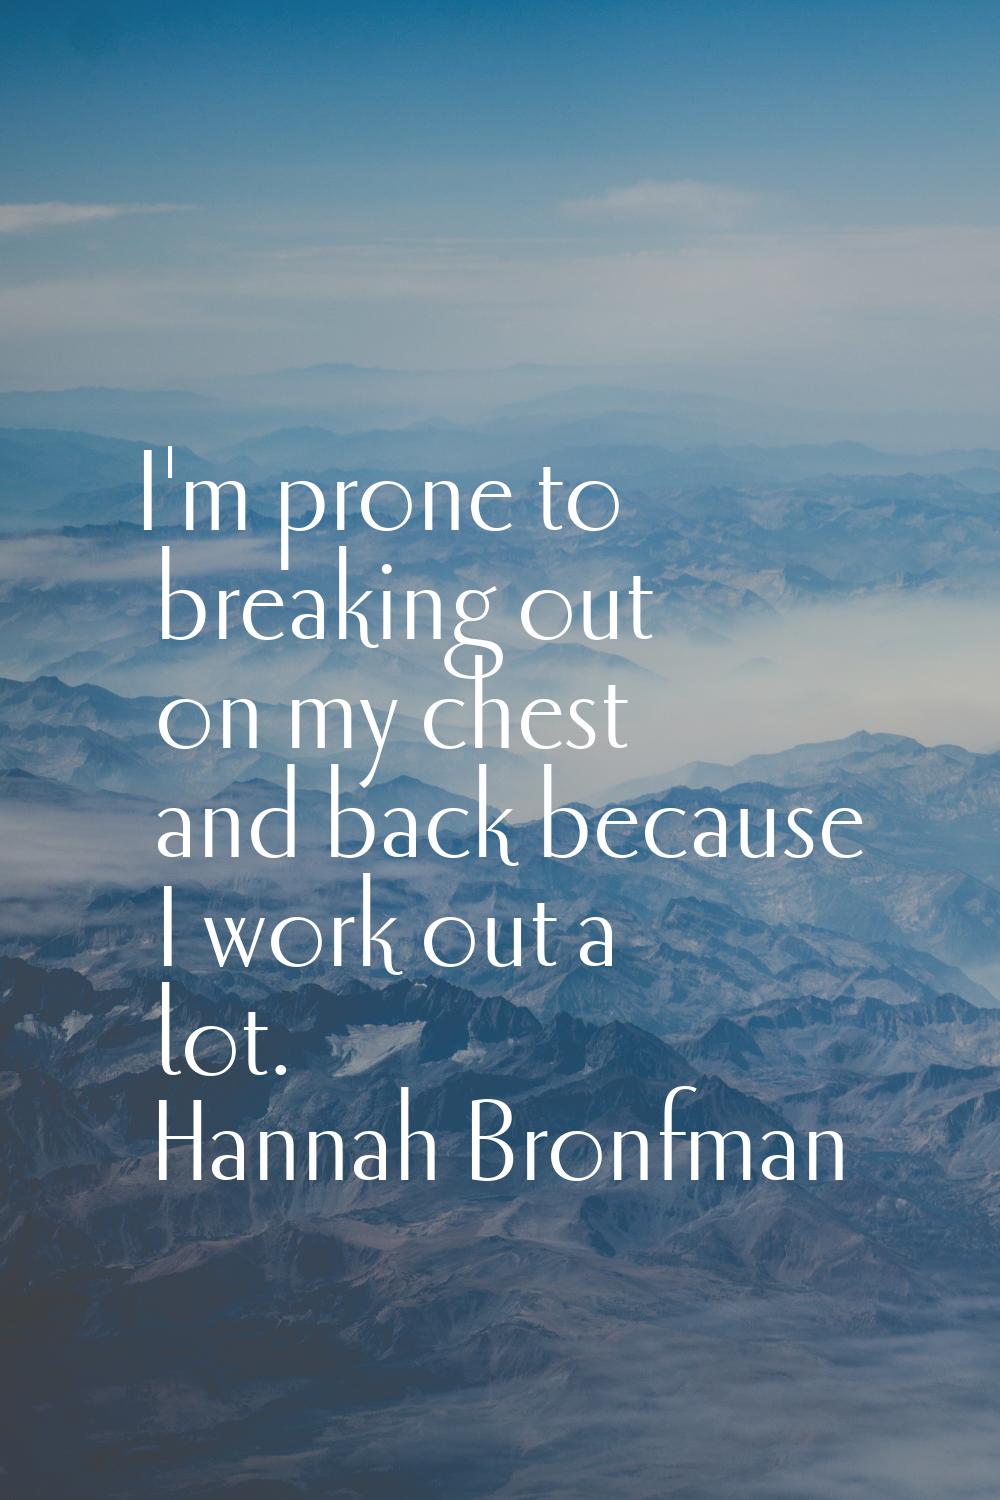 I'm prone to breaking out on my chest and back because I work out a lot.